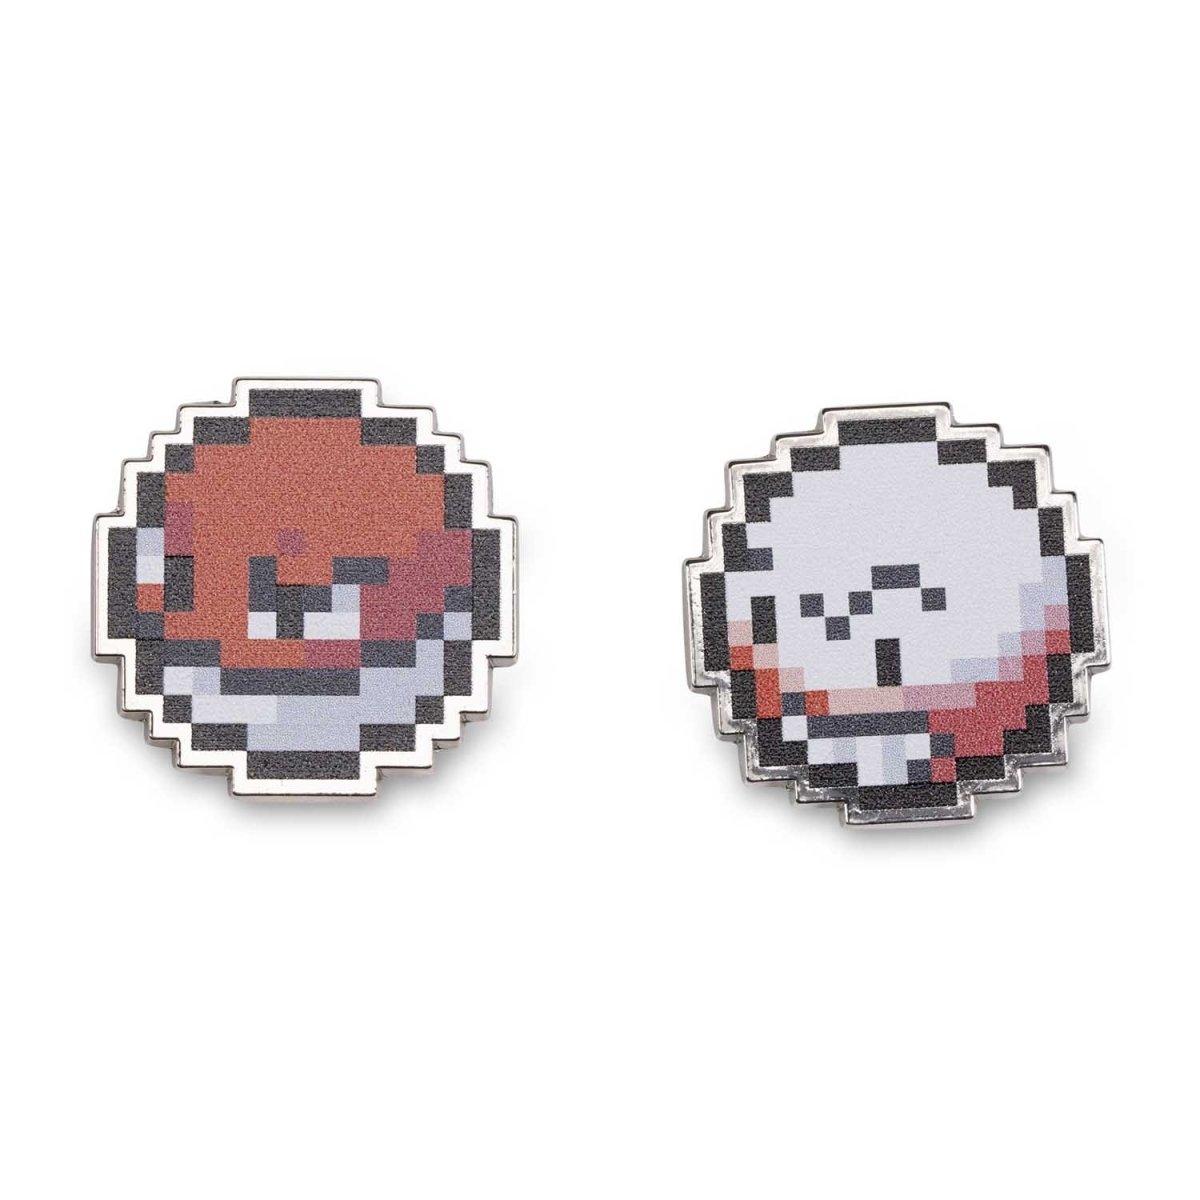 Pokemon Scarlet and Violet: Where to get Voltorb and Electrode